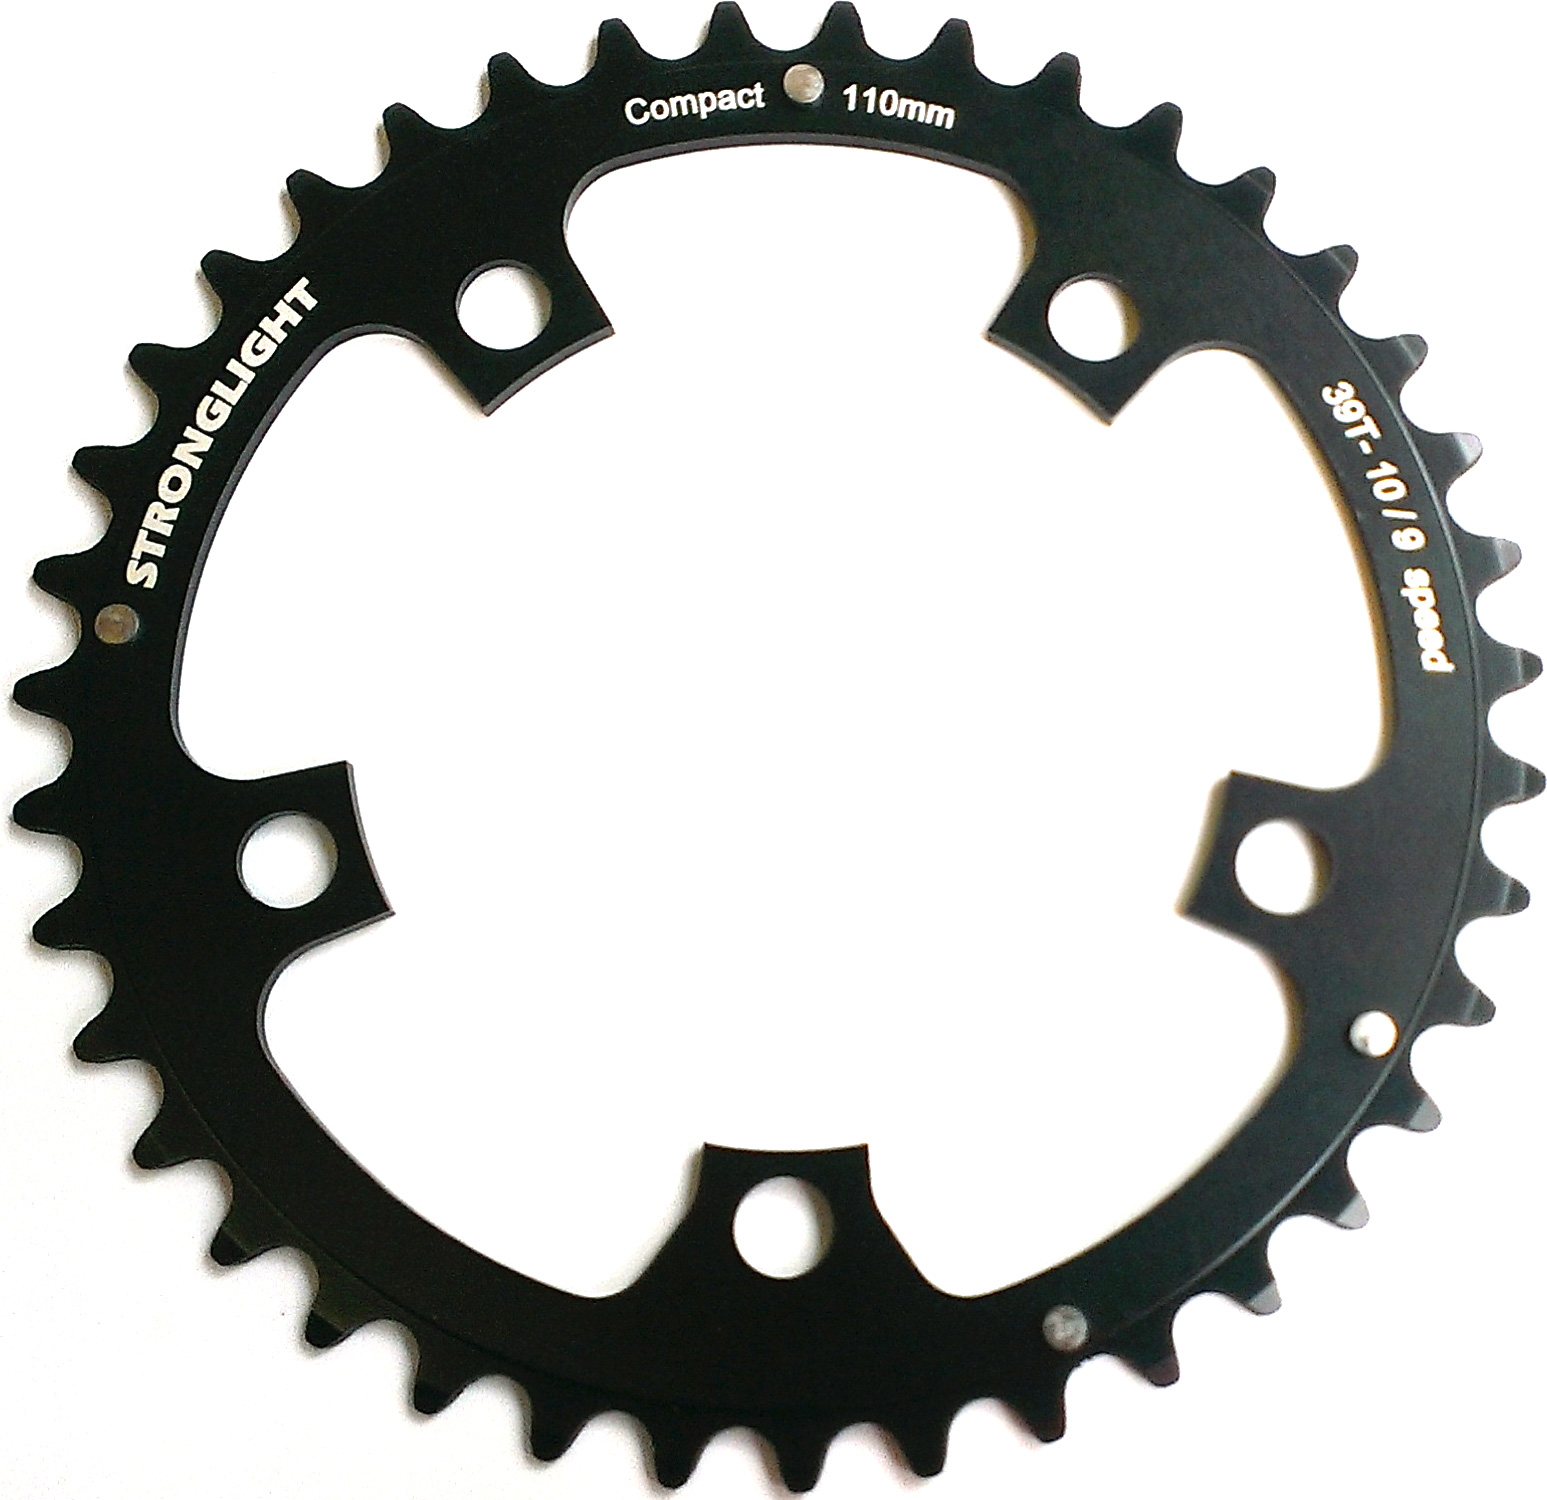 RD11052Z Stronglight 52T Black 5-Arm/110mm Chainring